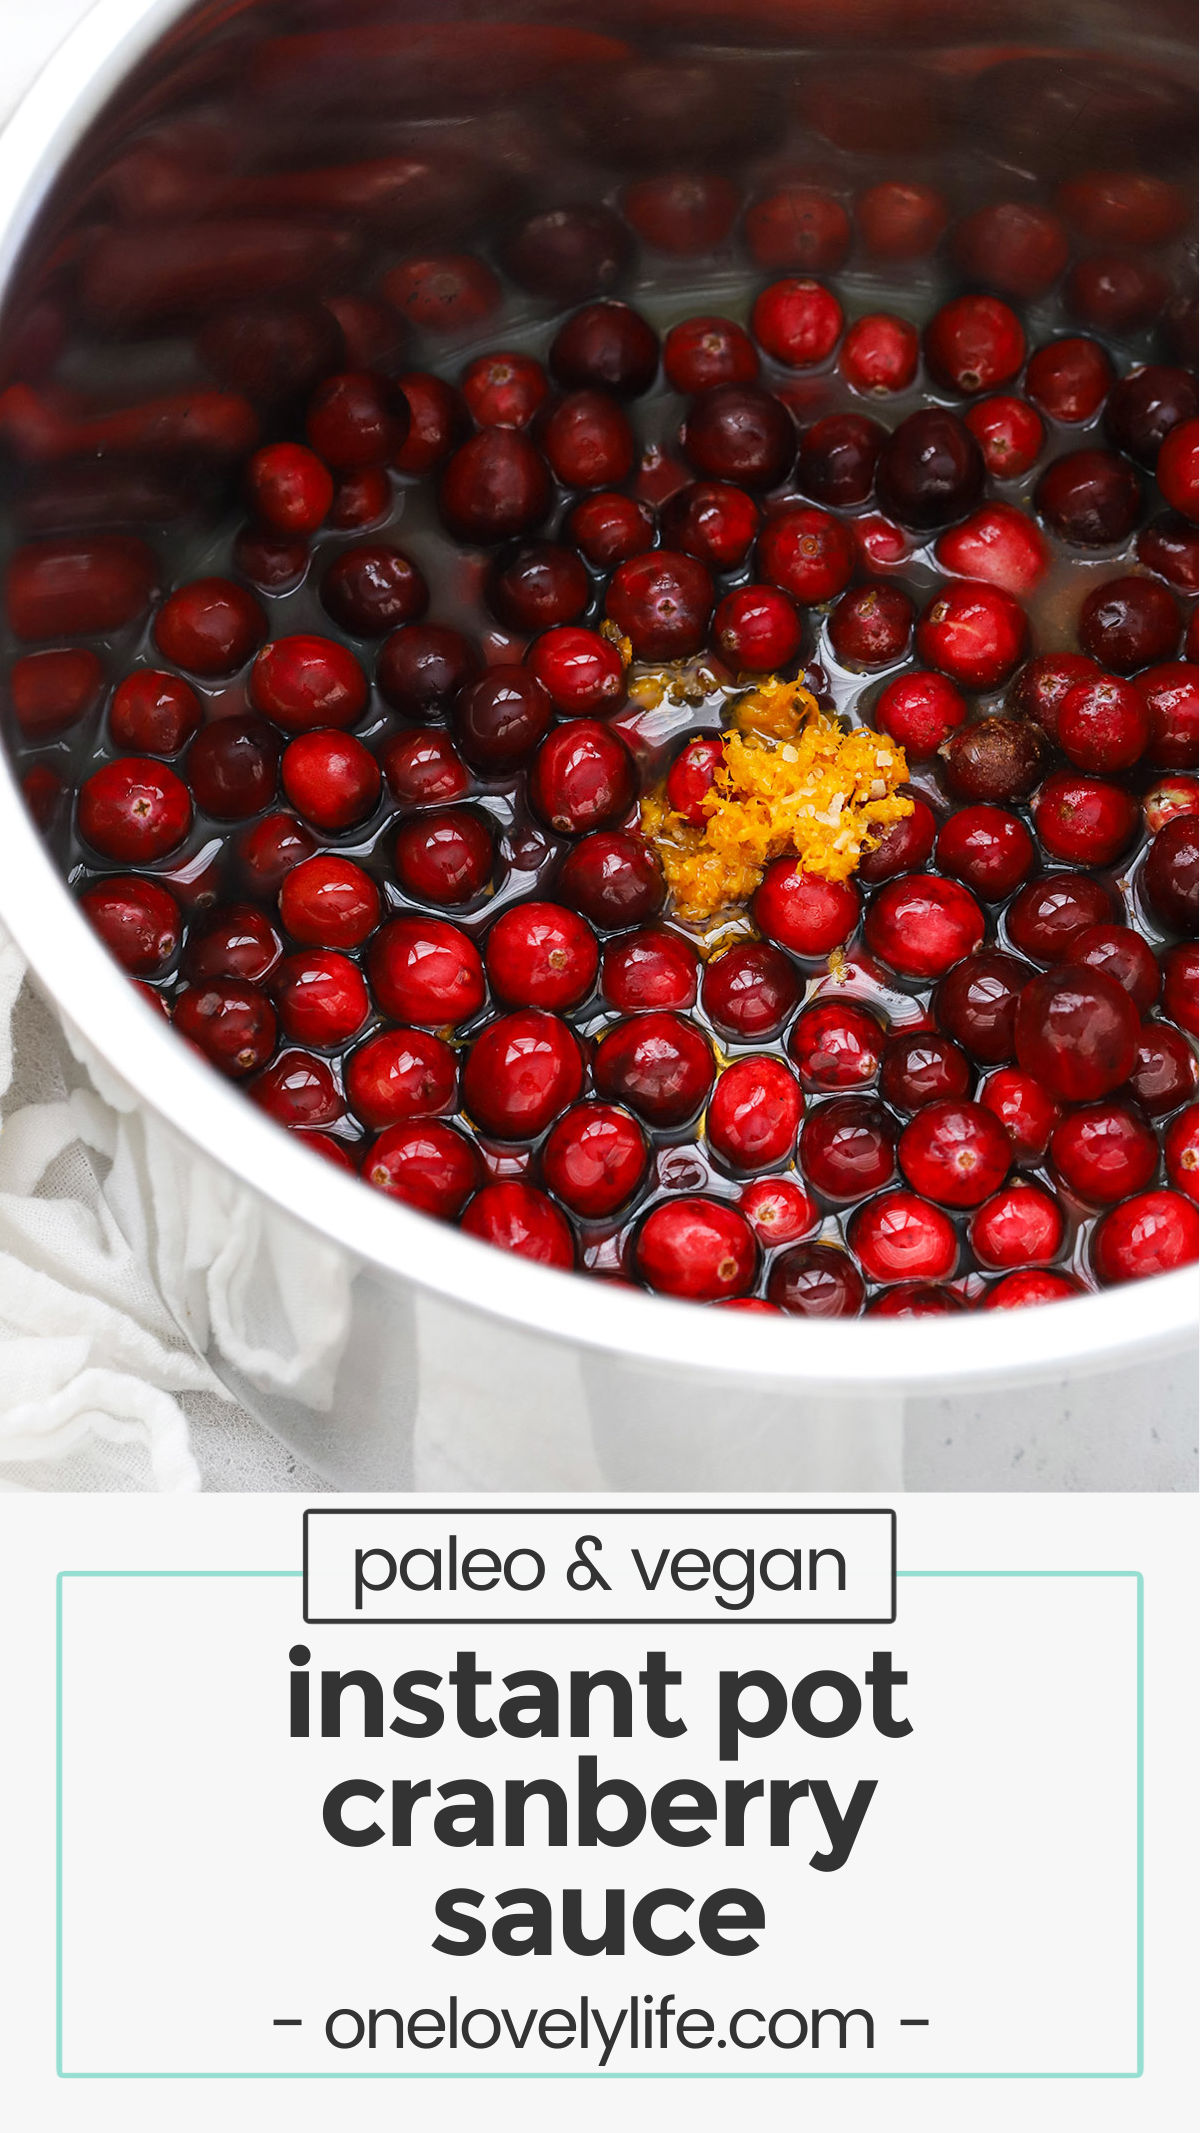 Instant Pot Cranberry Sauce - This pressure cooker cranberry sauce recipe couldn't be easier! (Naturally paleo, vegan & gluten-free) // instapot cranberry sauce / homemade cranberry sauce recipe / easy cranberry sauce recipe / instant pot thanksgiving recipes / instant pot christmas recipes / thanksgiving side dish / instant pot vegan cranberry sauce / instant pot paleo cranberry sauce /